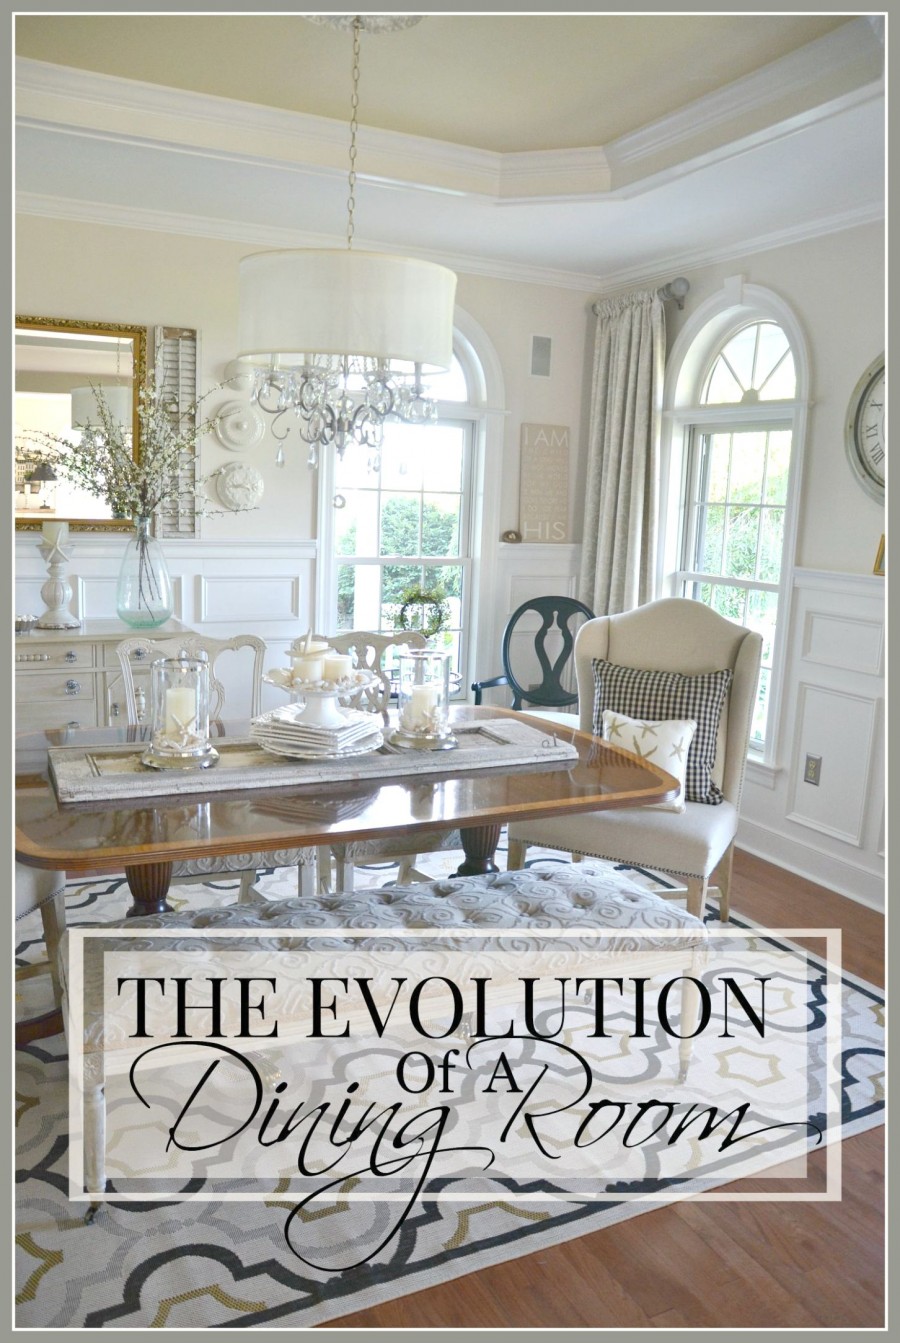 THE EVOLUTION OF A DINING ROOM